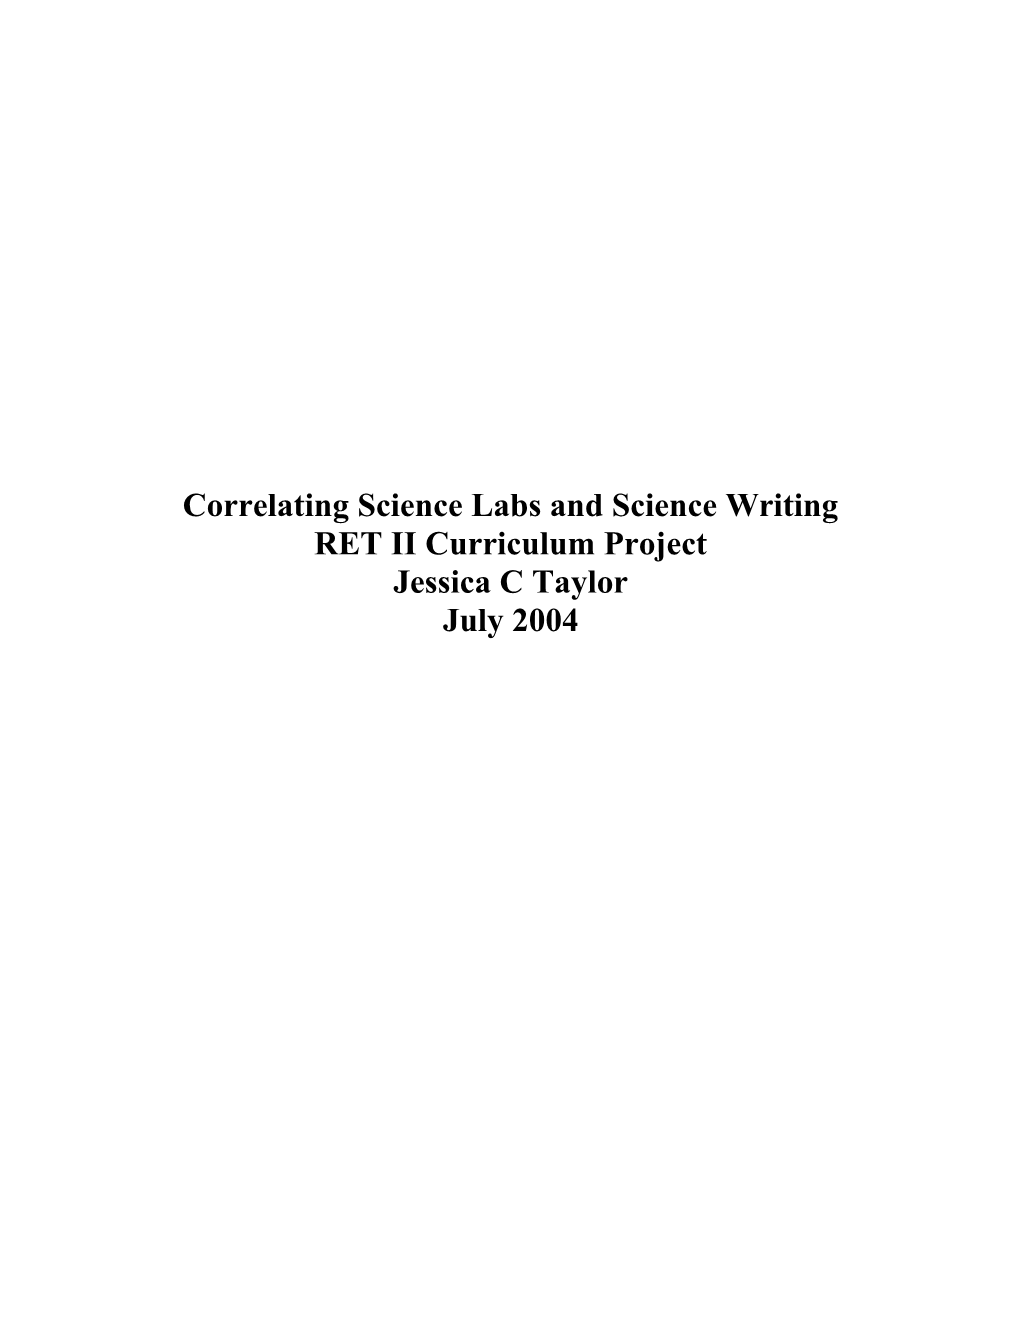 Correlating Science Labs and Science Writing